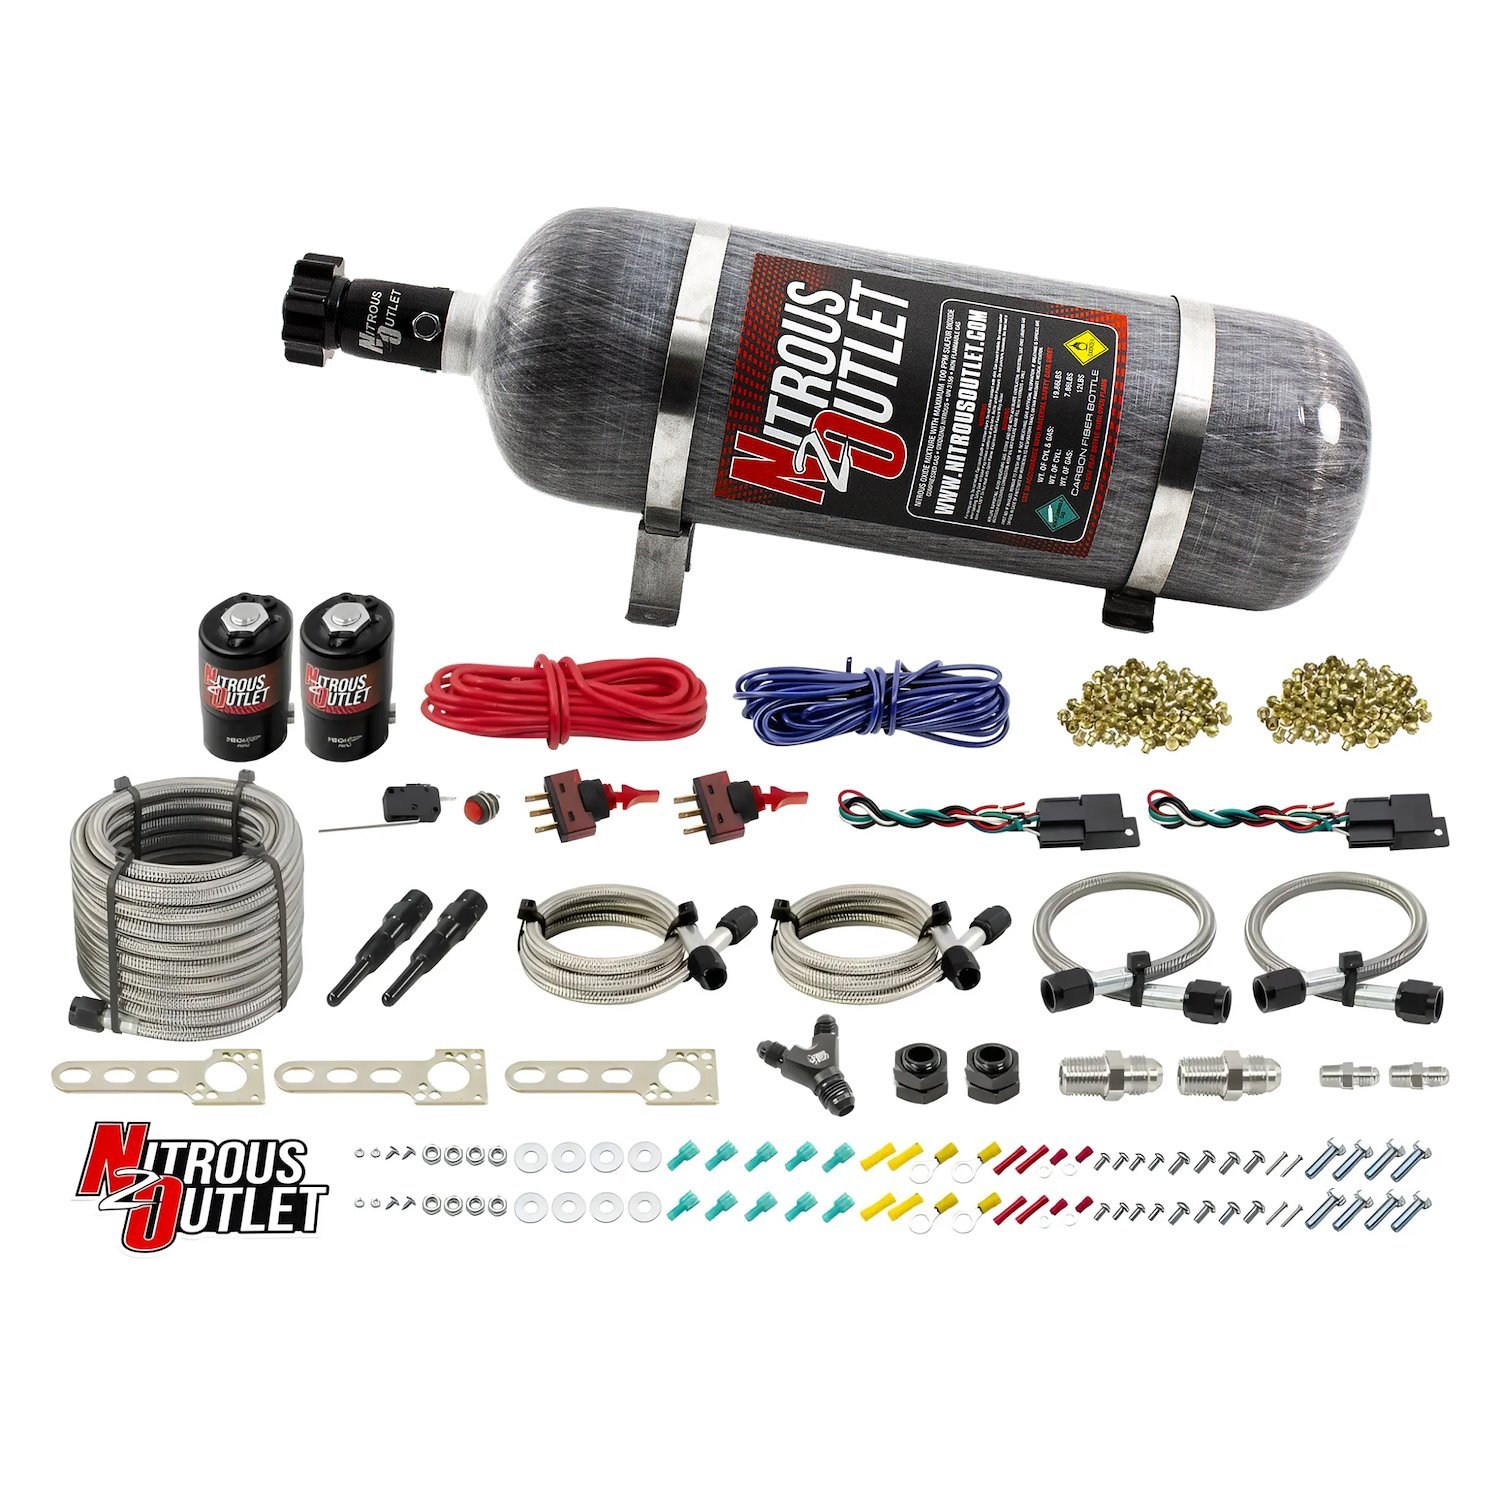 00-10207-12 Universal EFI Dual-Stage Dry Single-Nozzle System, 35-200HP, 12lb Bottle